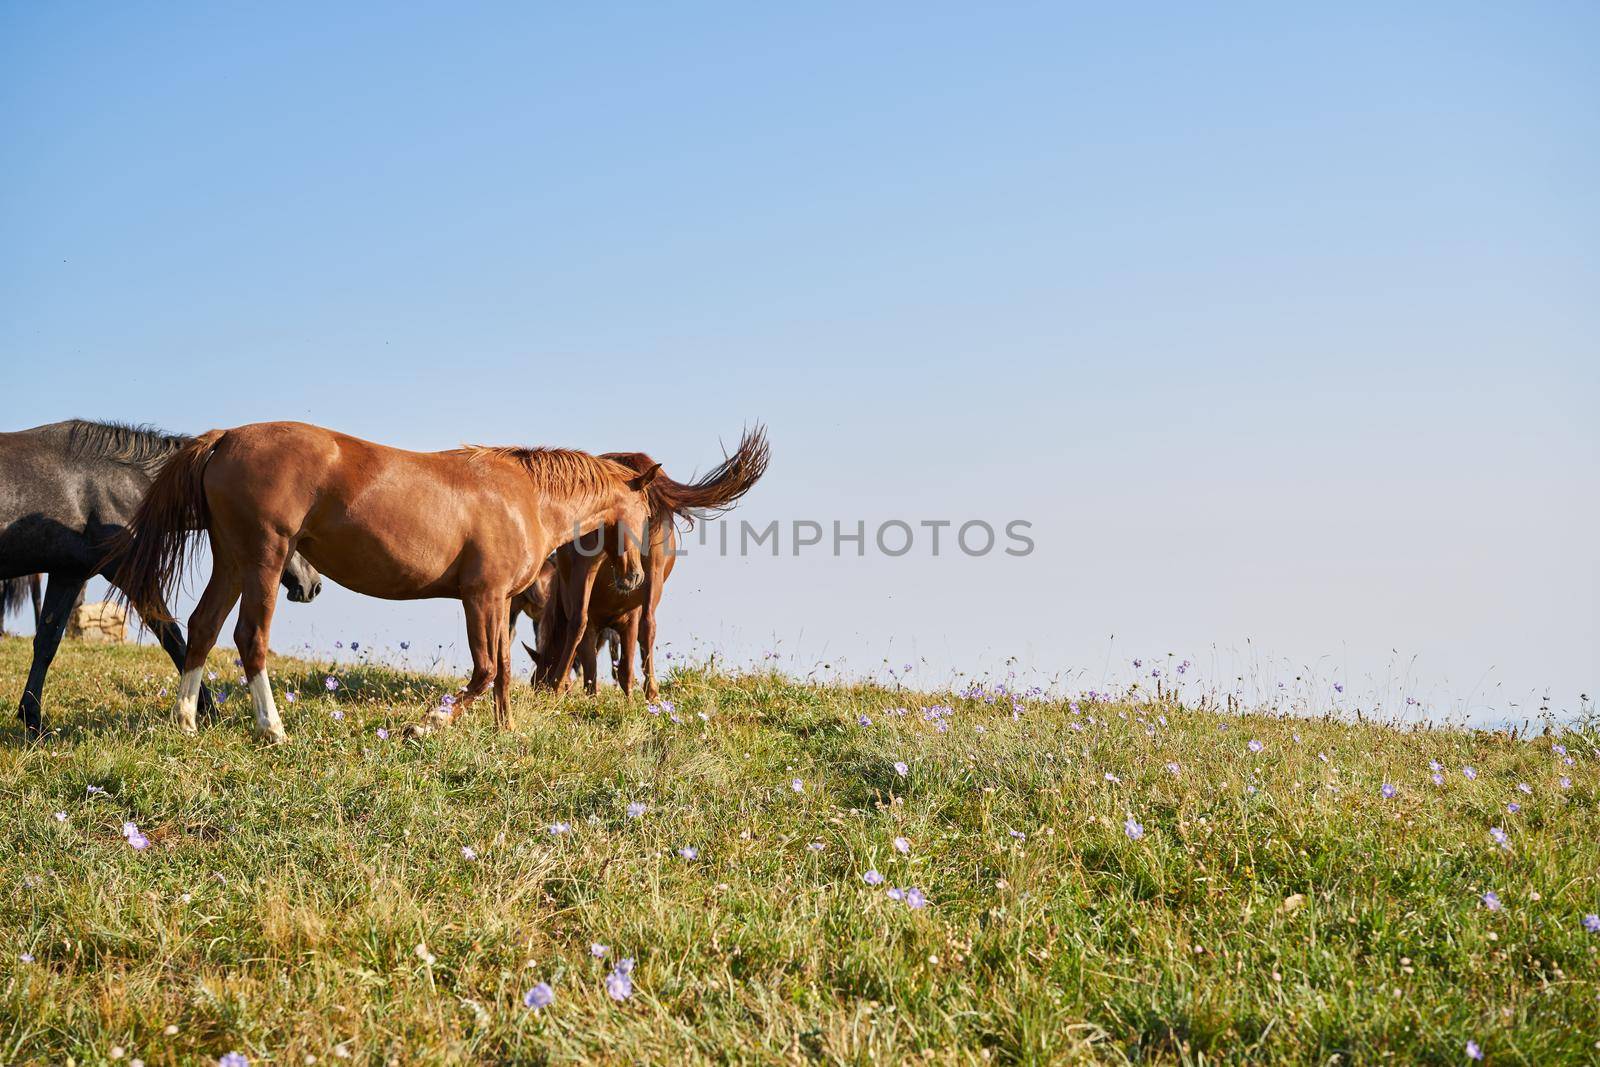 Herd of horses in the field mammals animals landscape by Vichizh